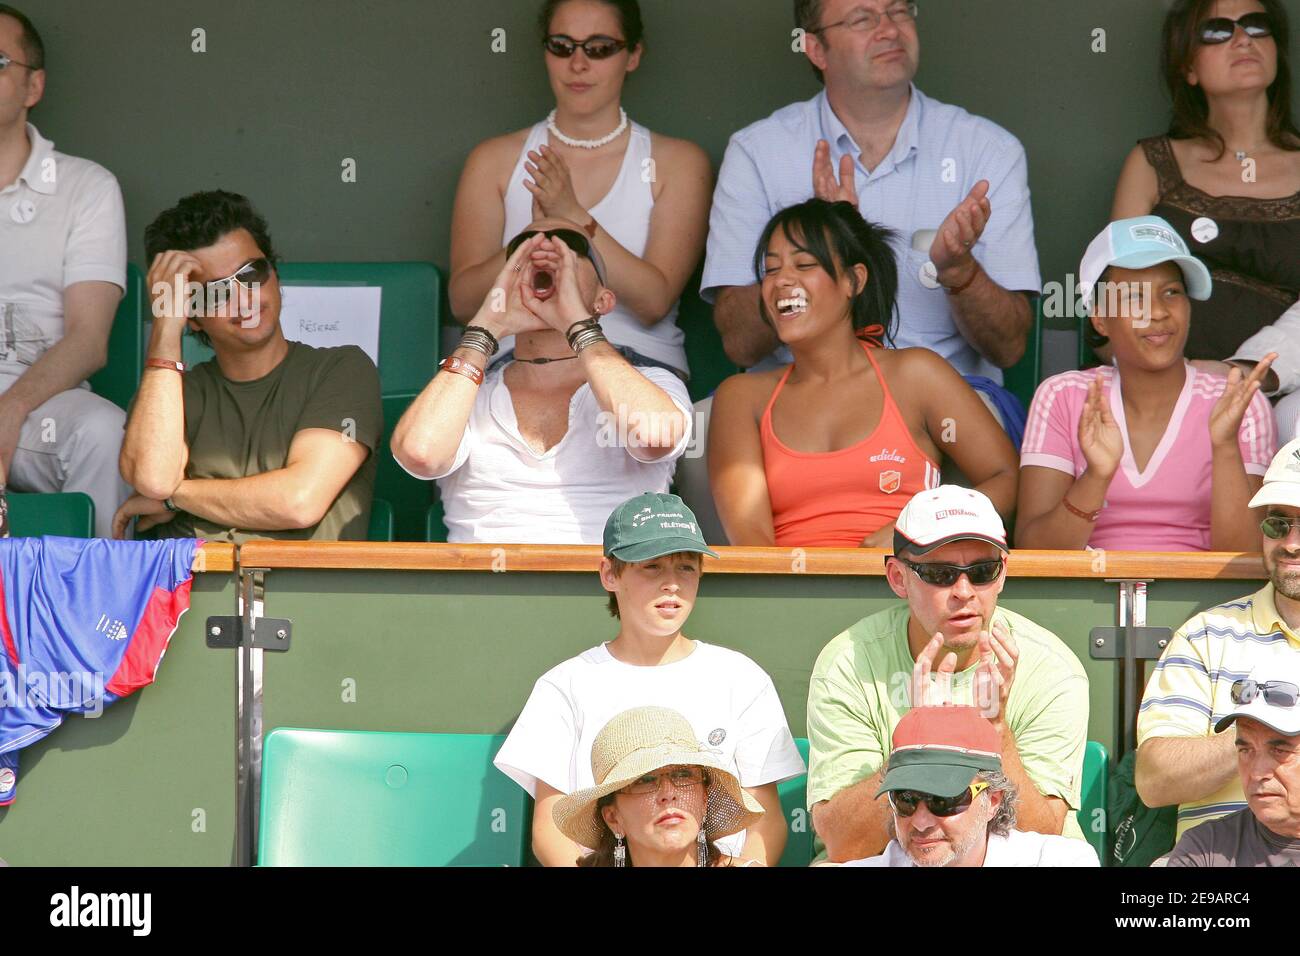 Pascal Obispo and Amel Bent during the men's final of the French Tennis  Open at Roland Garros Arena, in Paris, France on June 11, 2006. Photo by  Gorassini-Nebinger-Zabulon/ABACAPRESS.COM Stock Photo - Alamy